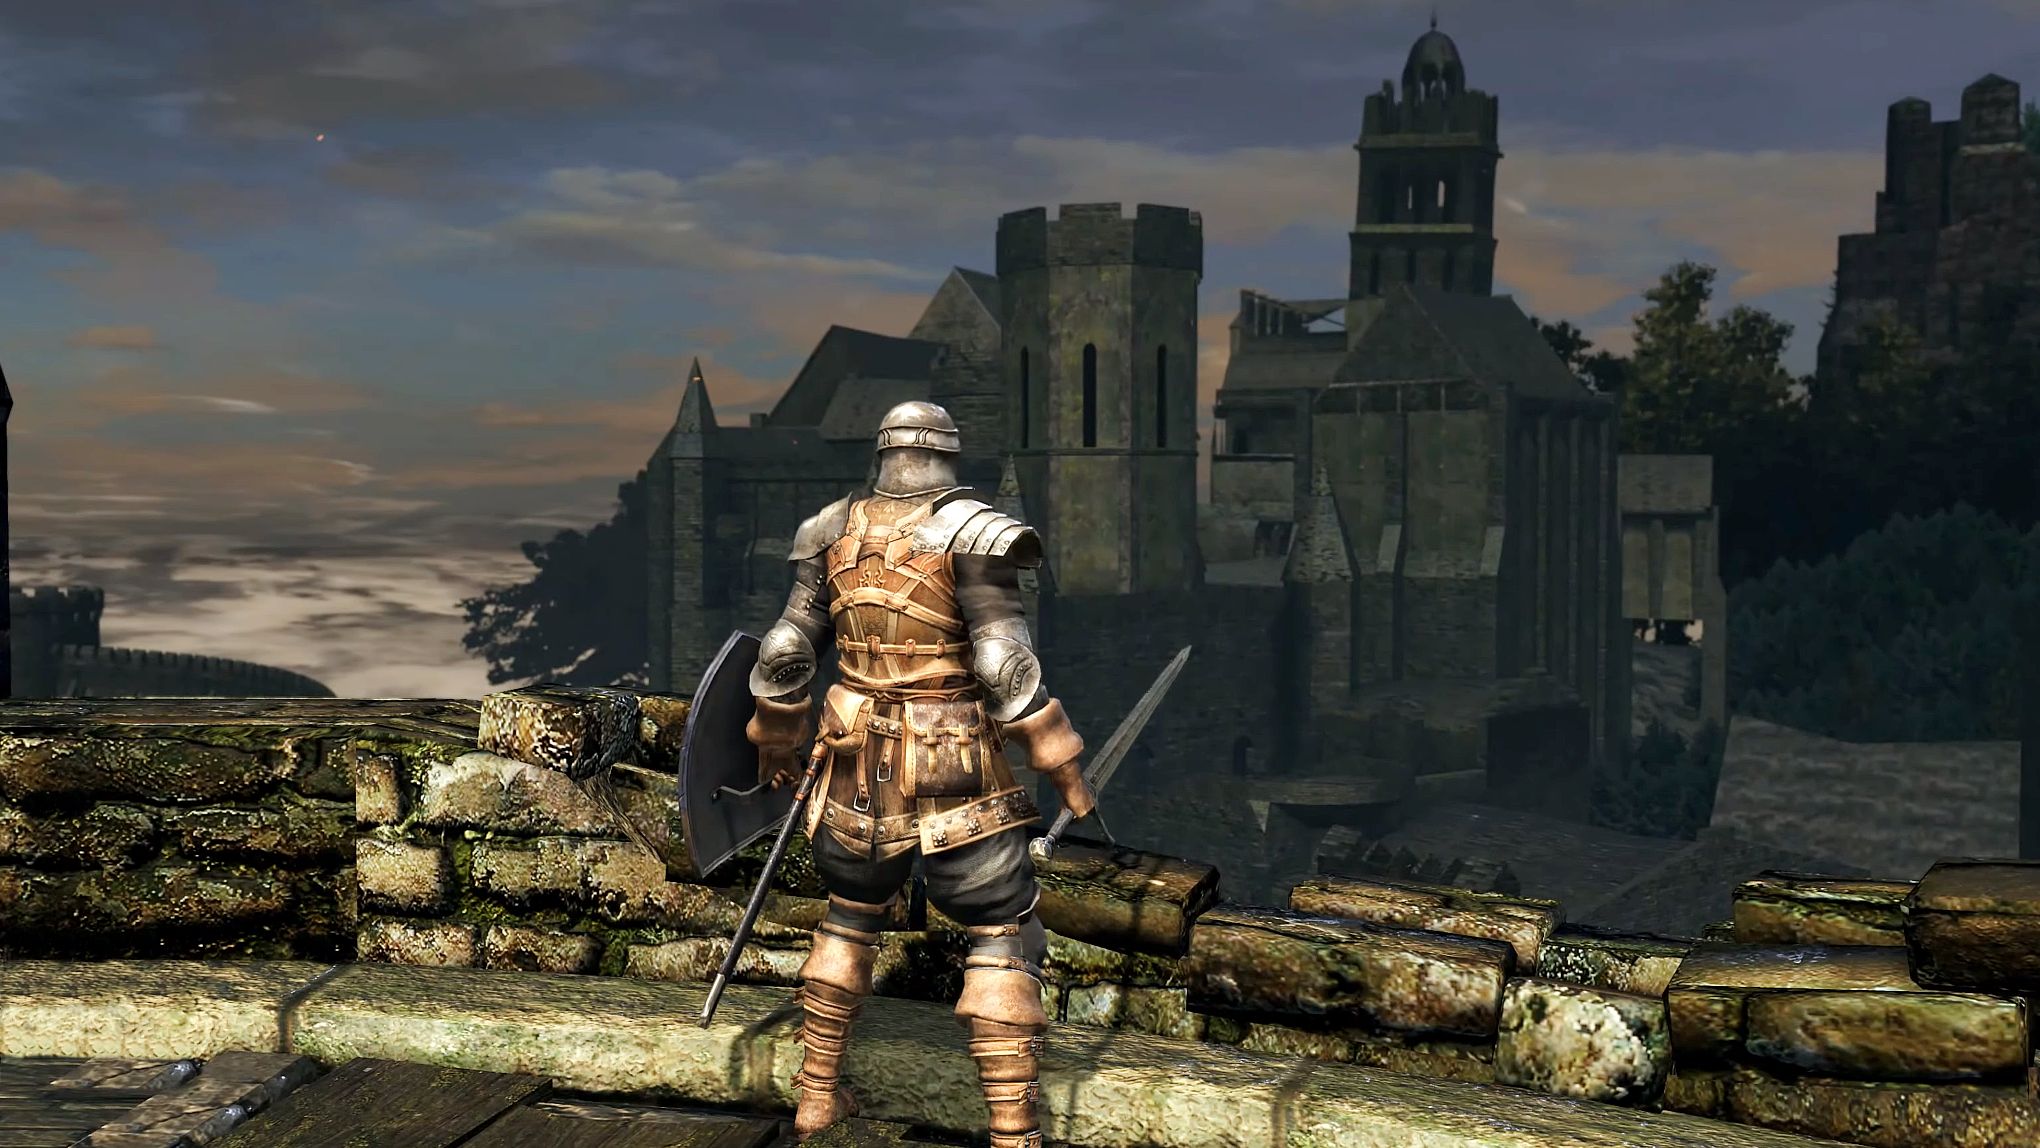 On its 10th anniversary, Dark Souls is still the best game I've ever played